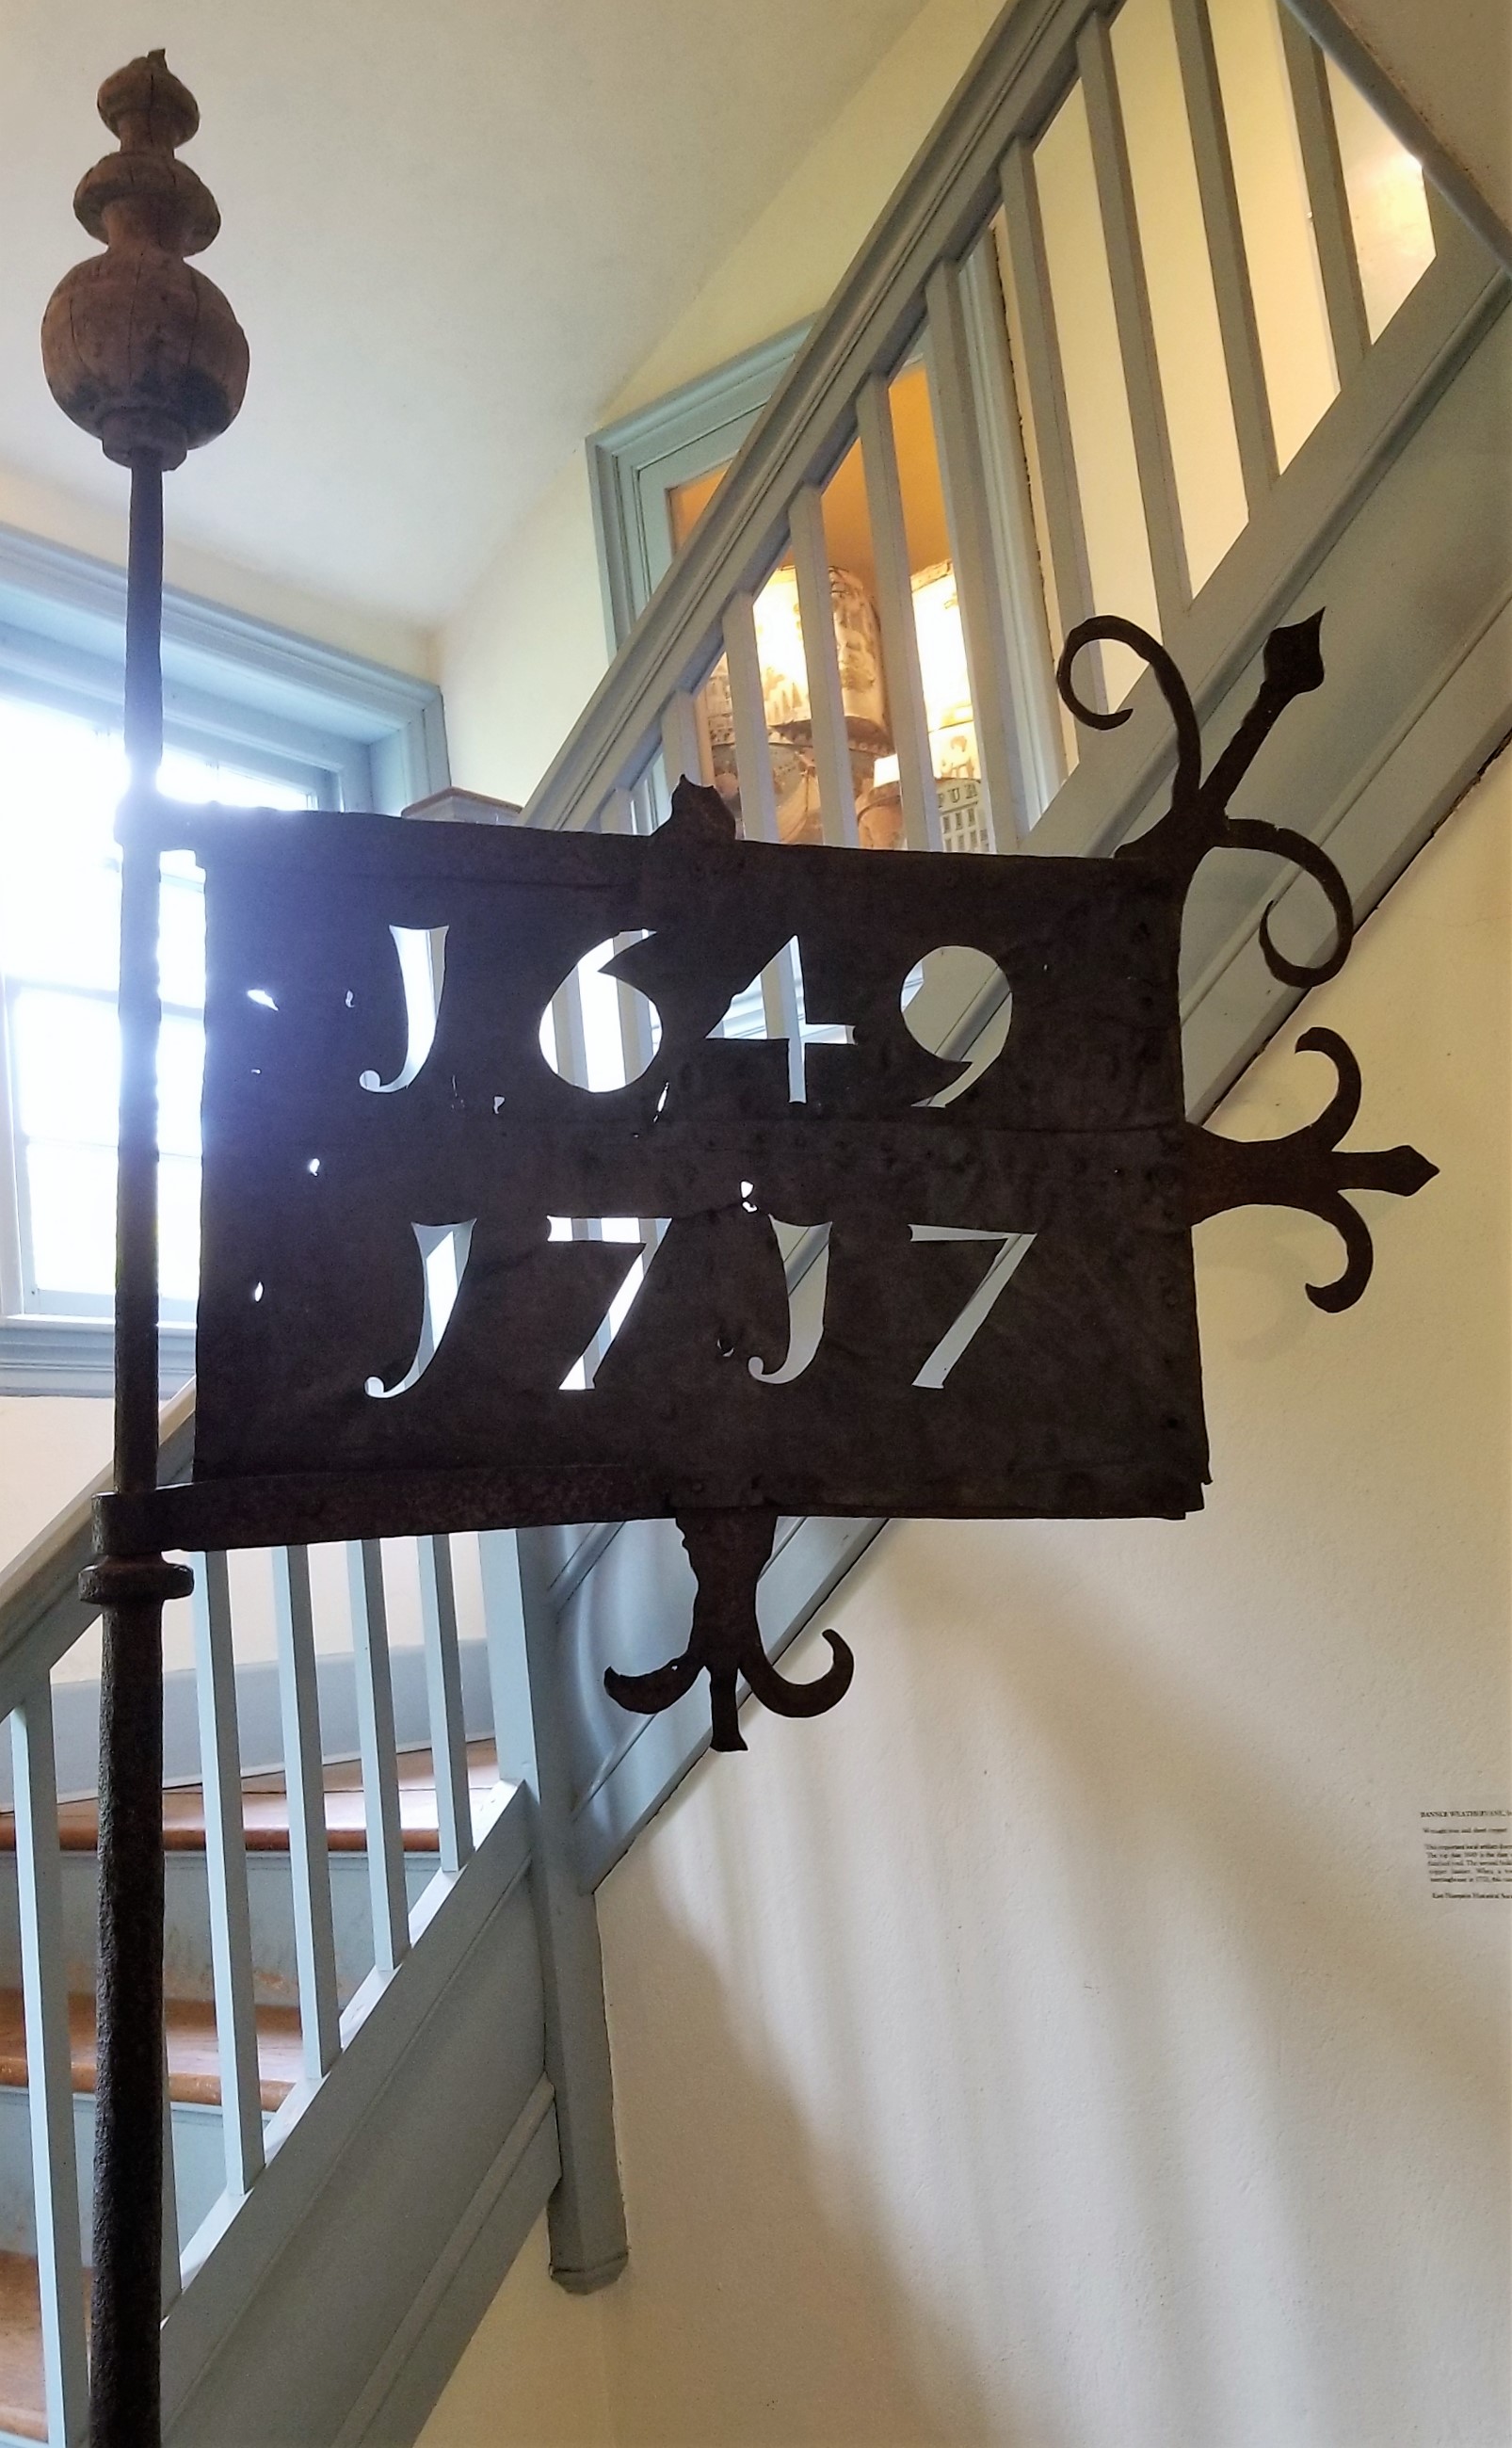  Banner Weather Vane, from the 1717 church, c. 1753  wrought iron and sheet cooper  This important local artifact documents the history of East Hampton’s Meeting Houses. The top date 1649 is the date of construction of our first meeting house that ha